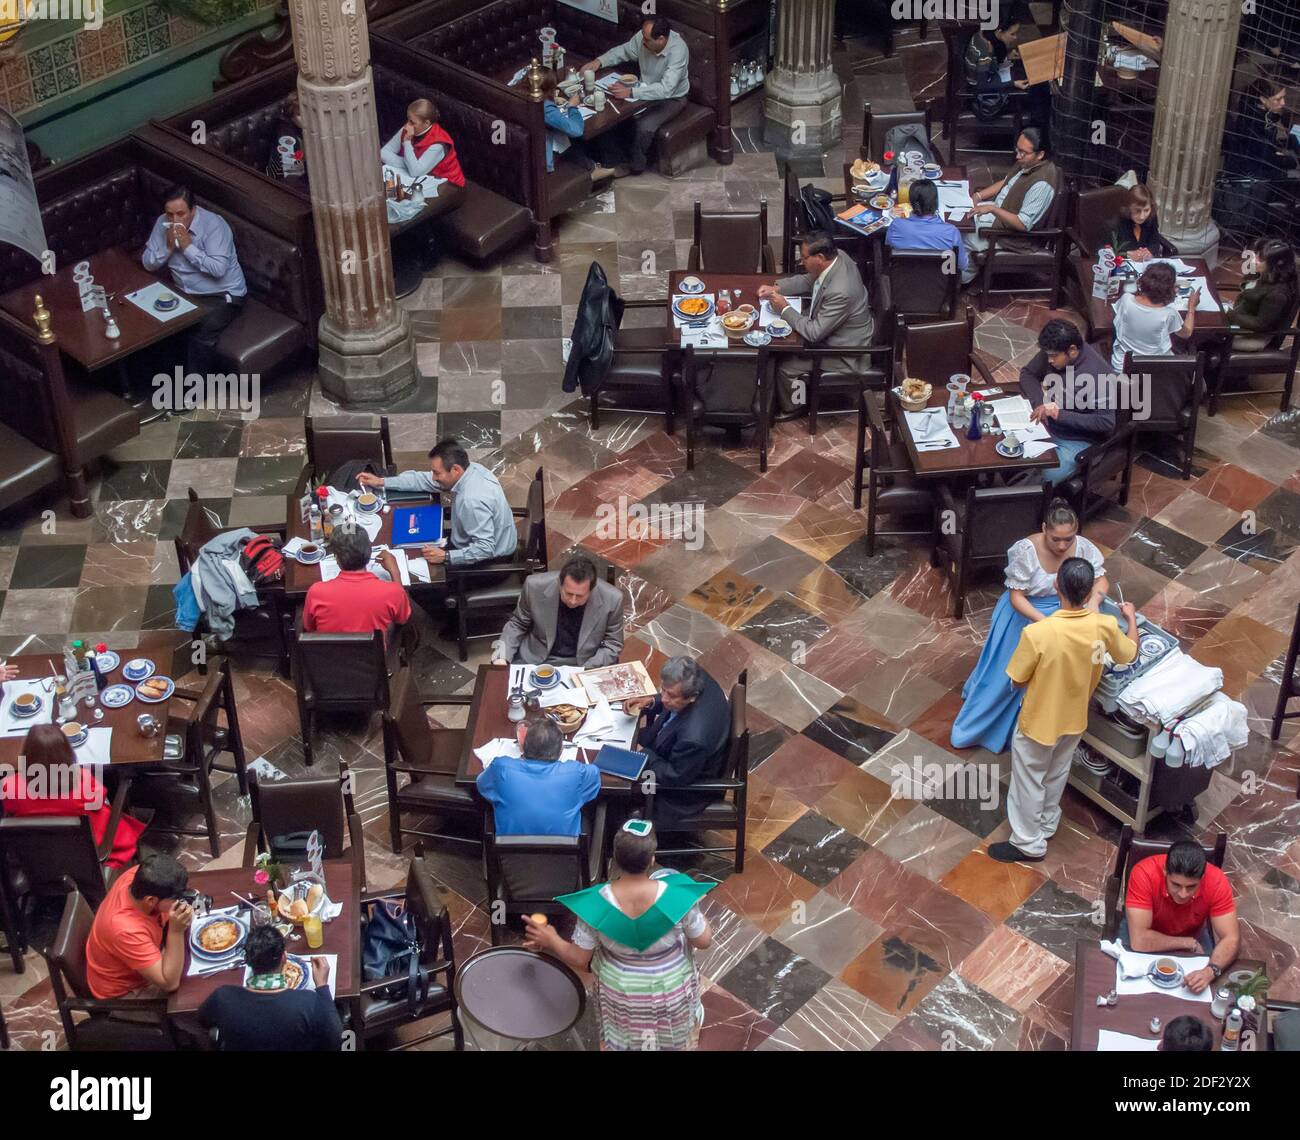 Diners in the Casa de Azulejos Sanborns a Mexican-style restaurant chain in Mexico City, Mexico Stock Photo